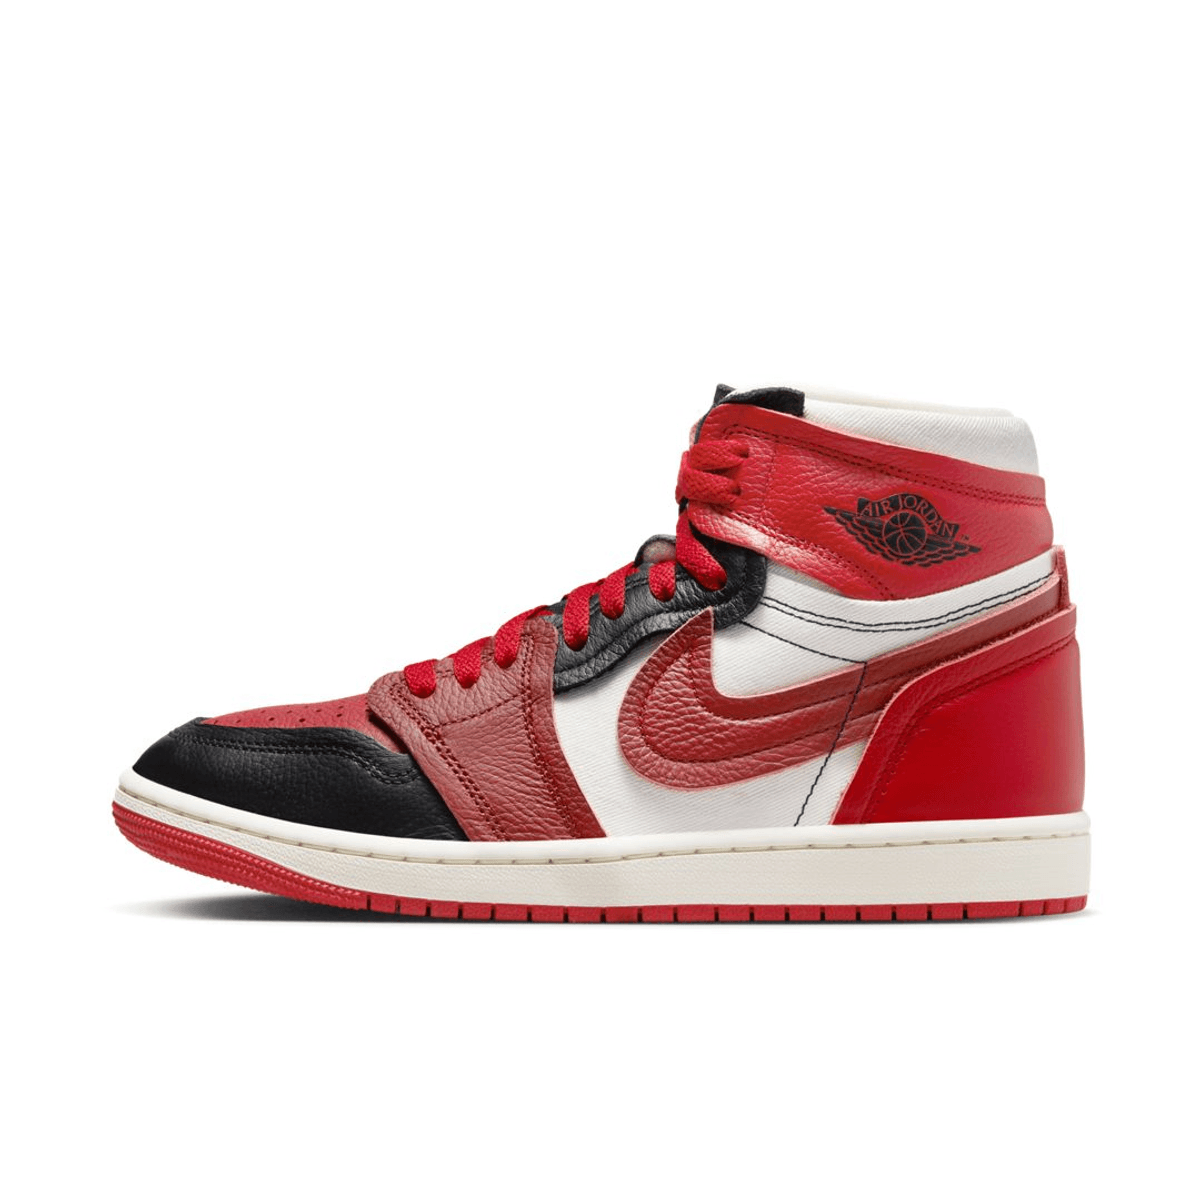 Official Images Of The Air Jordan 1 MM High “Sport Red”